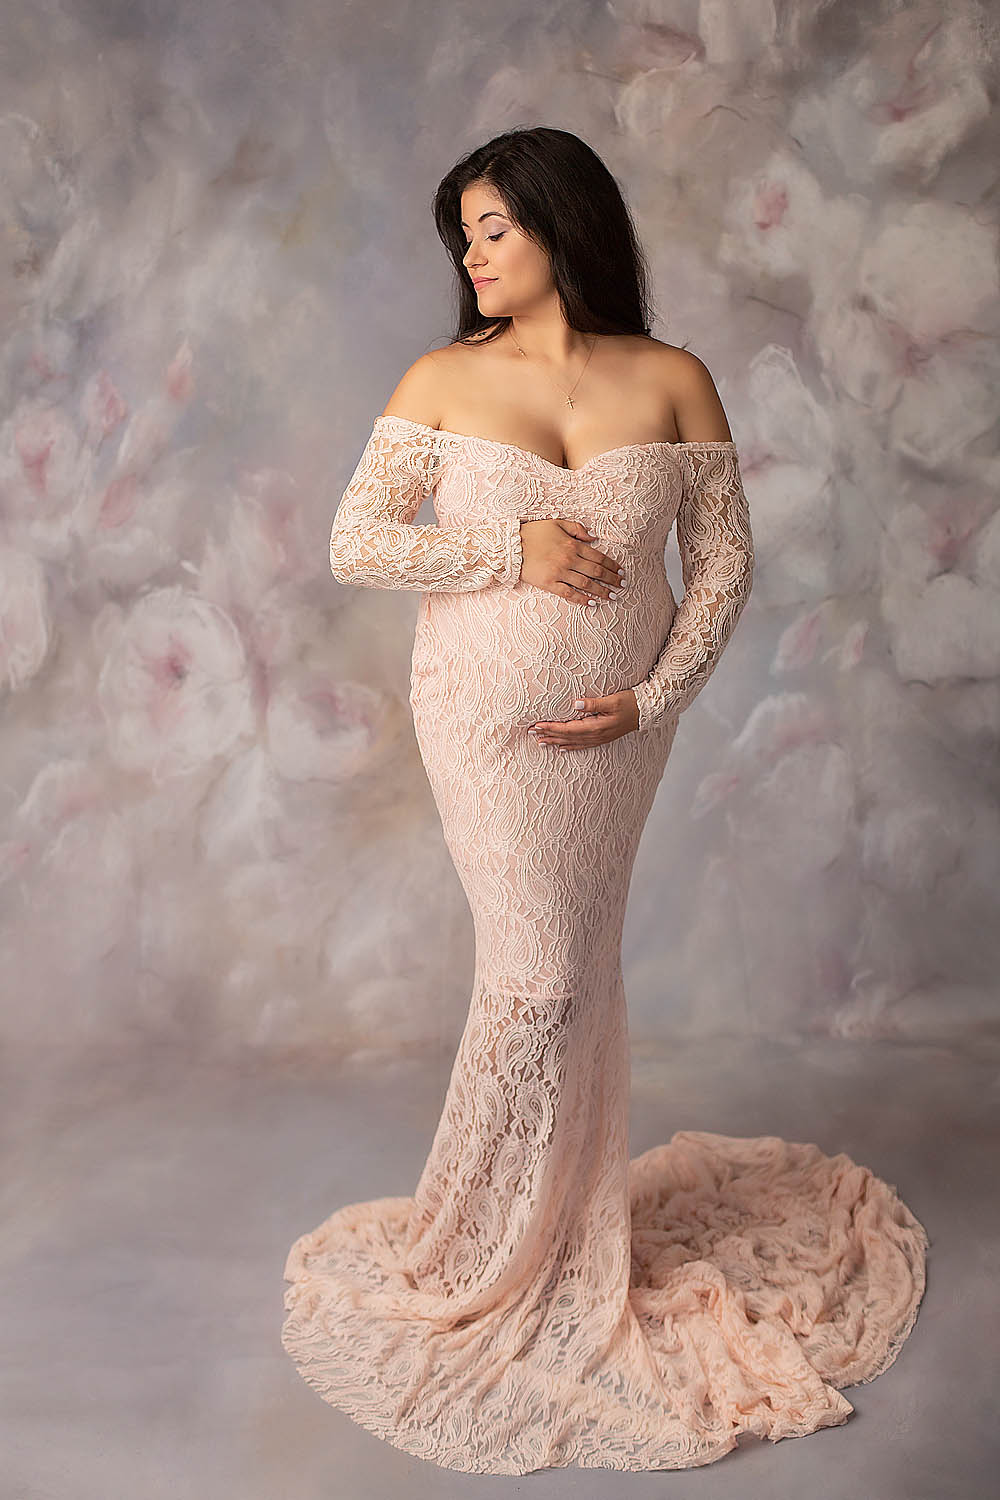 pregnant lady in lacy maternity dress for photoshoot in hollywood, fl